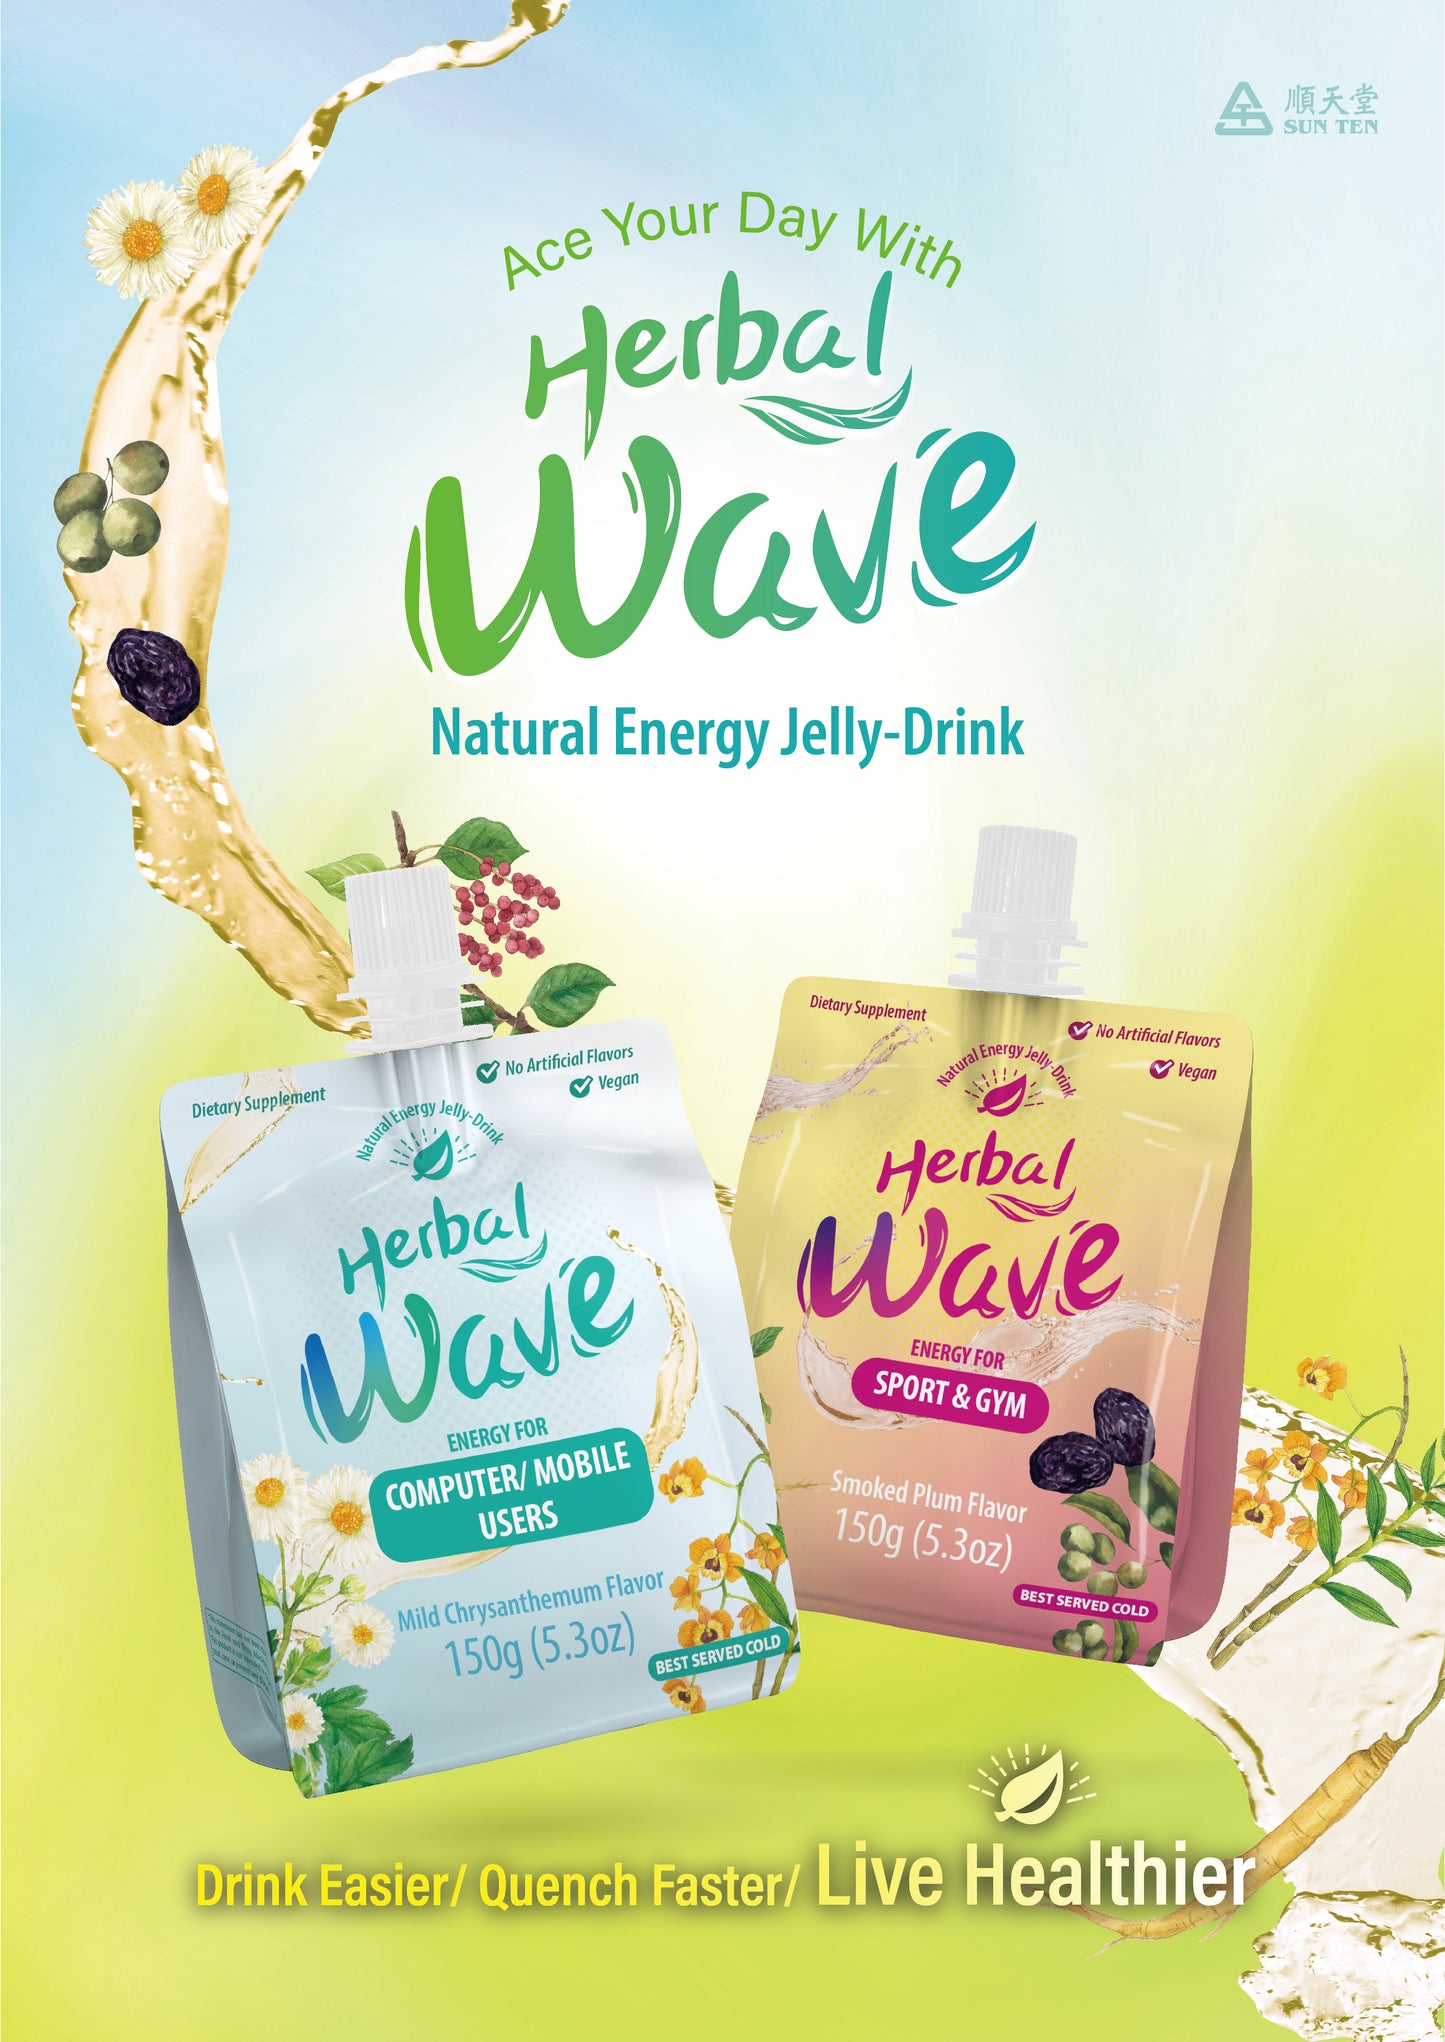 Herbal Wave Energy Jelly